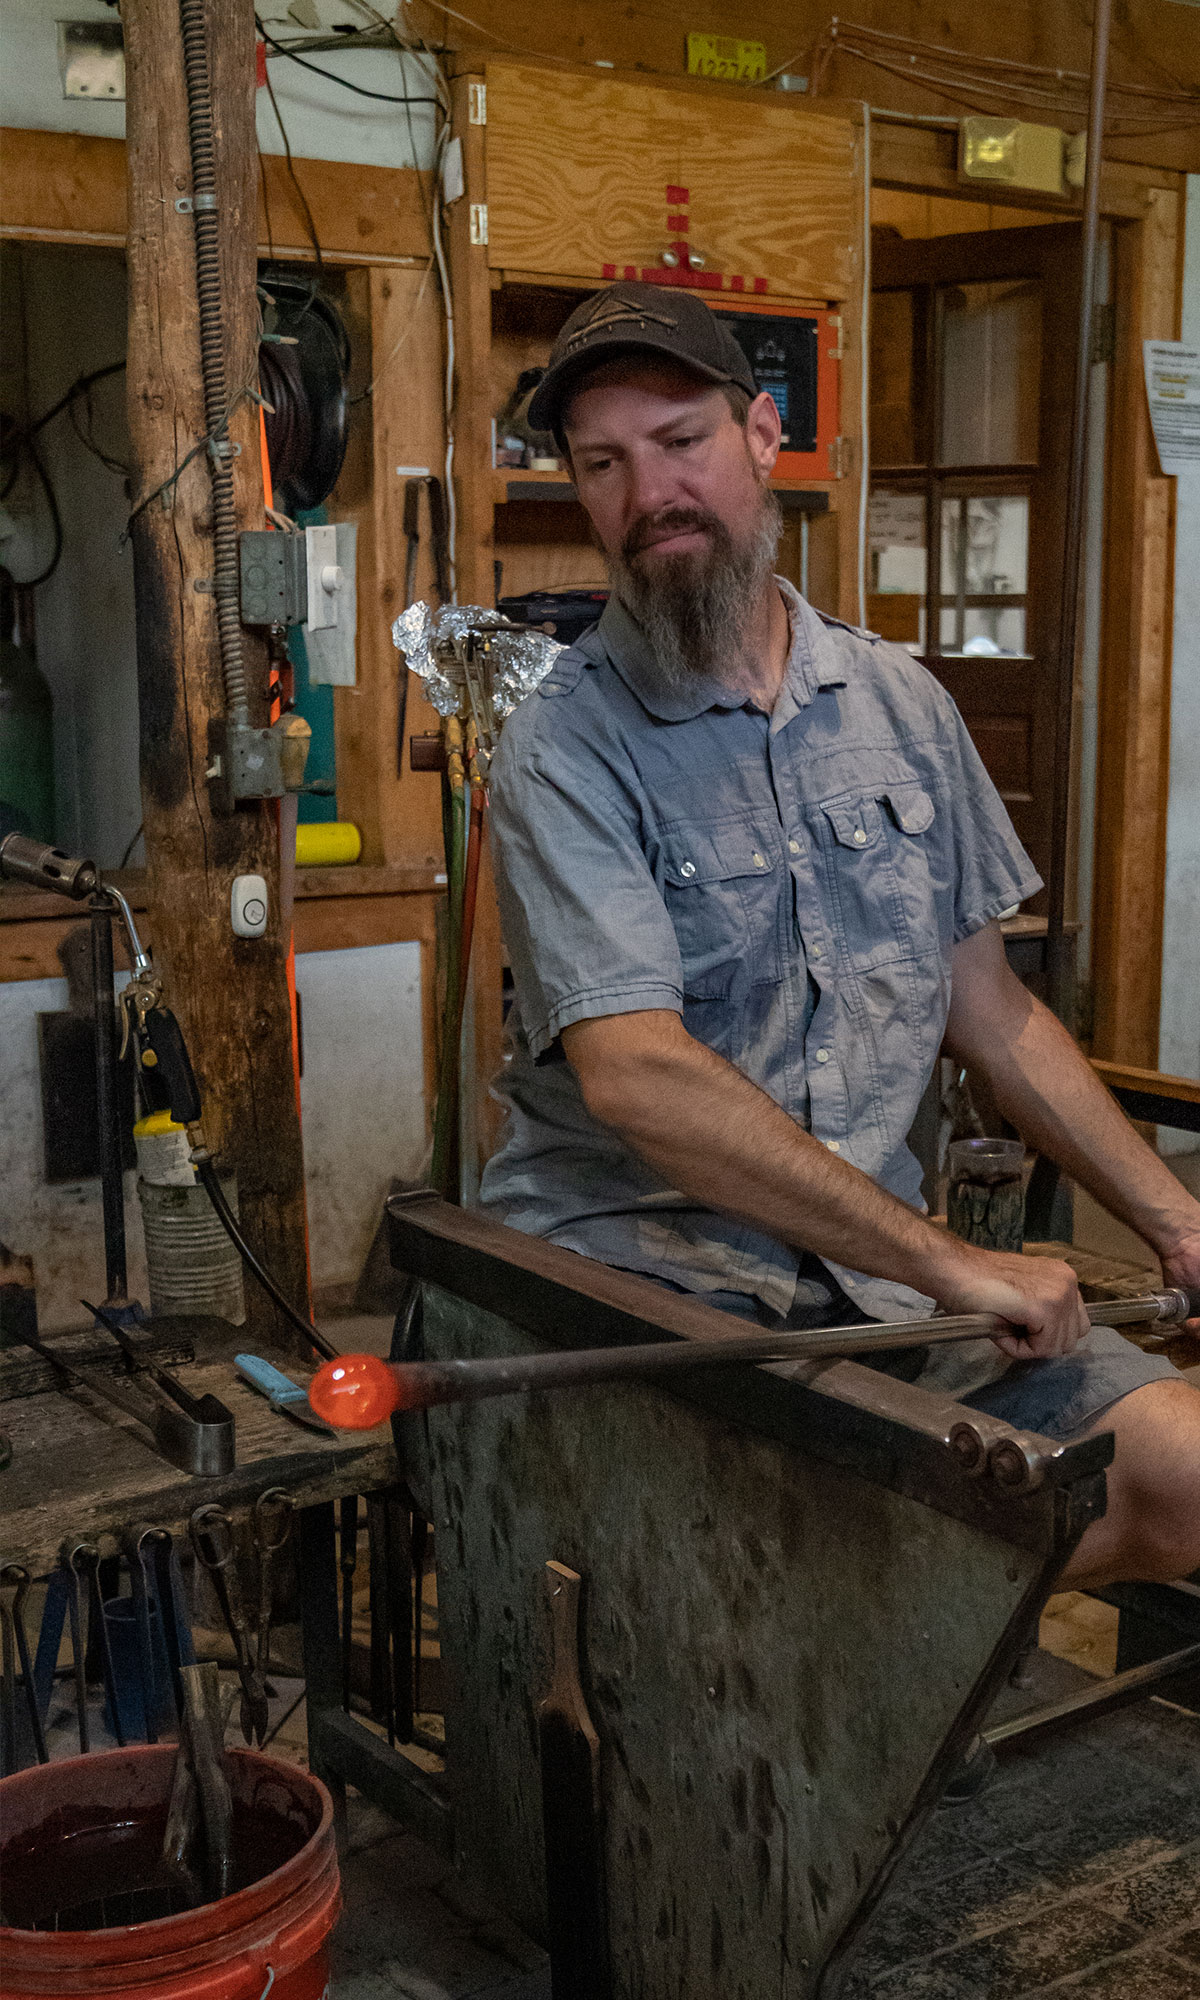 A glassmith or gaffer, blowing glass in Santa Fe, New Mexico.